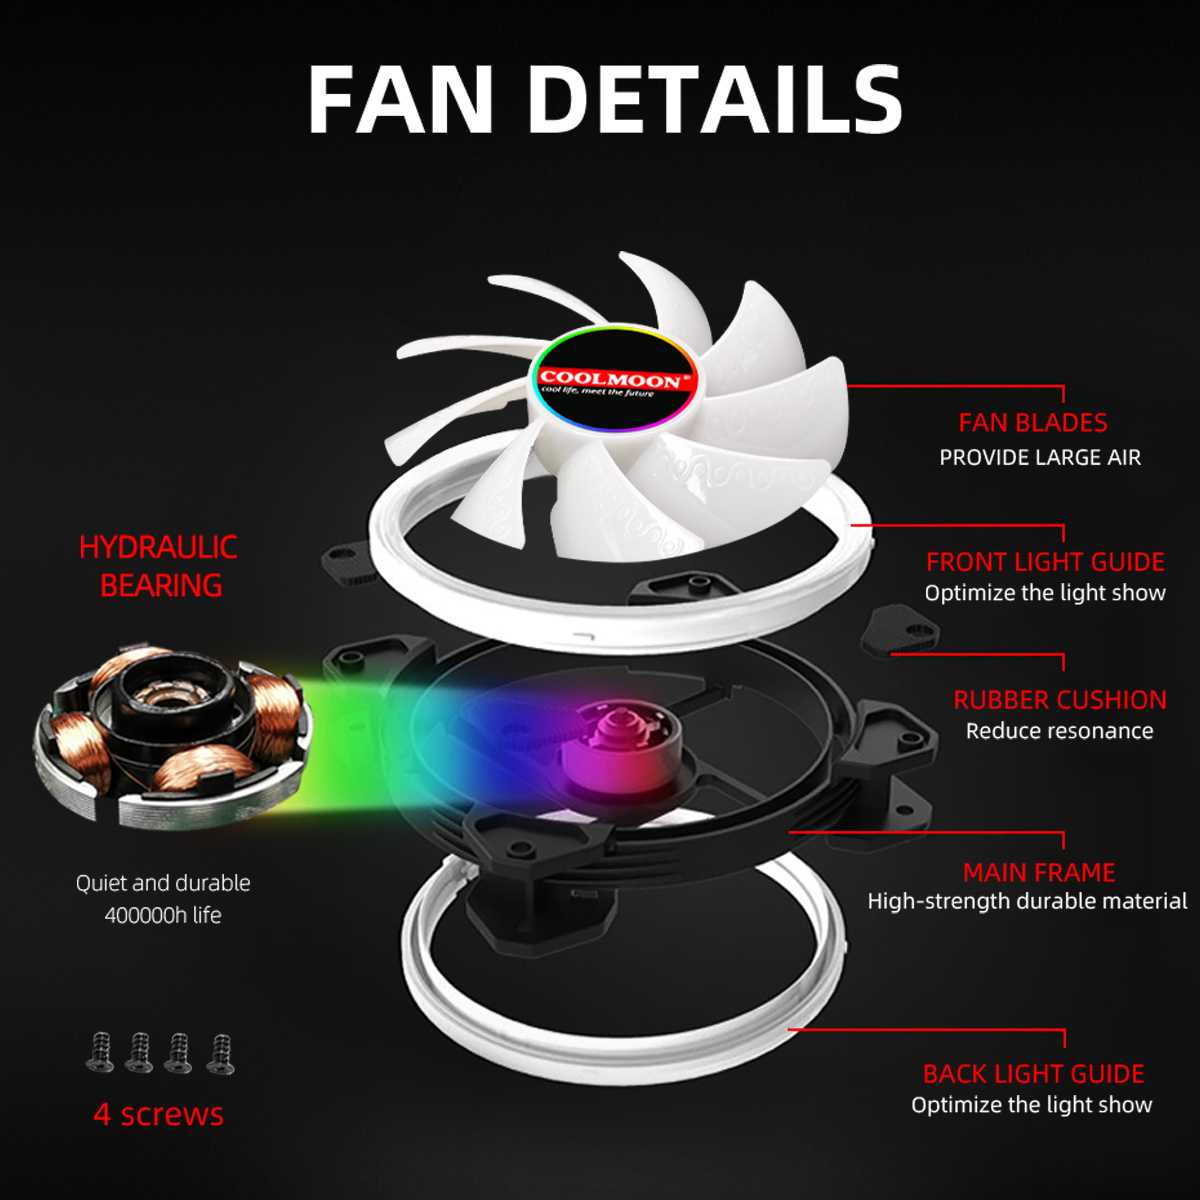 Find 120mm Computer PC Cooler Cooling Fan RGB LED Multicolor mode Quiet Chassis Fan With Controller for Sale on Gipsybee.com with cryptocurrencies